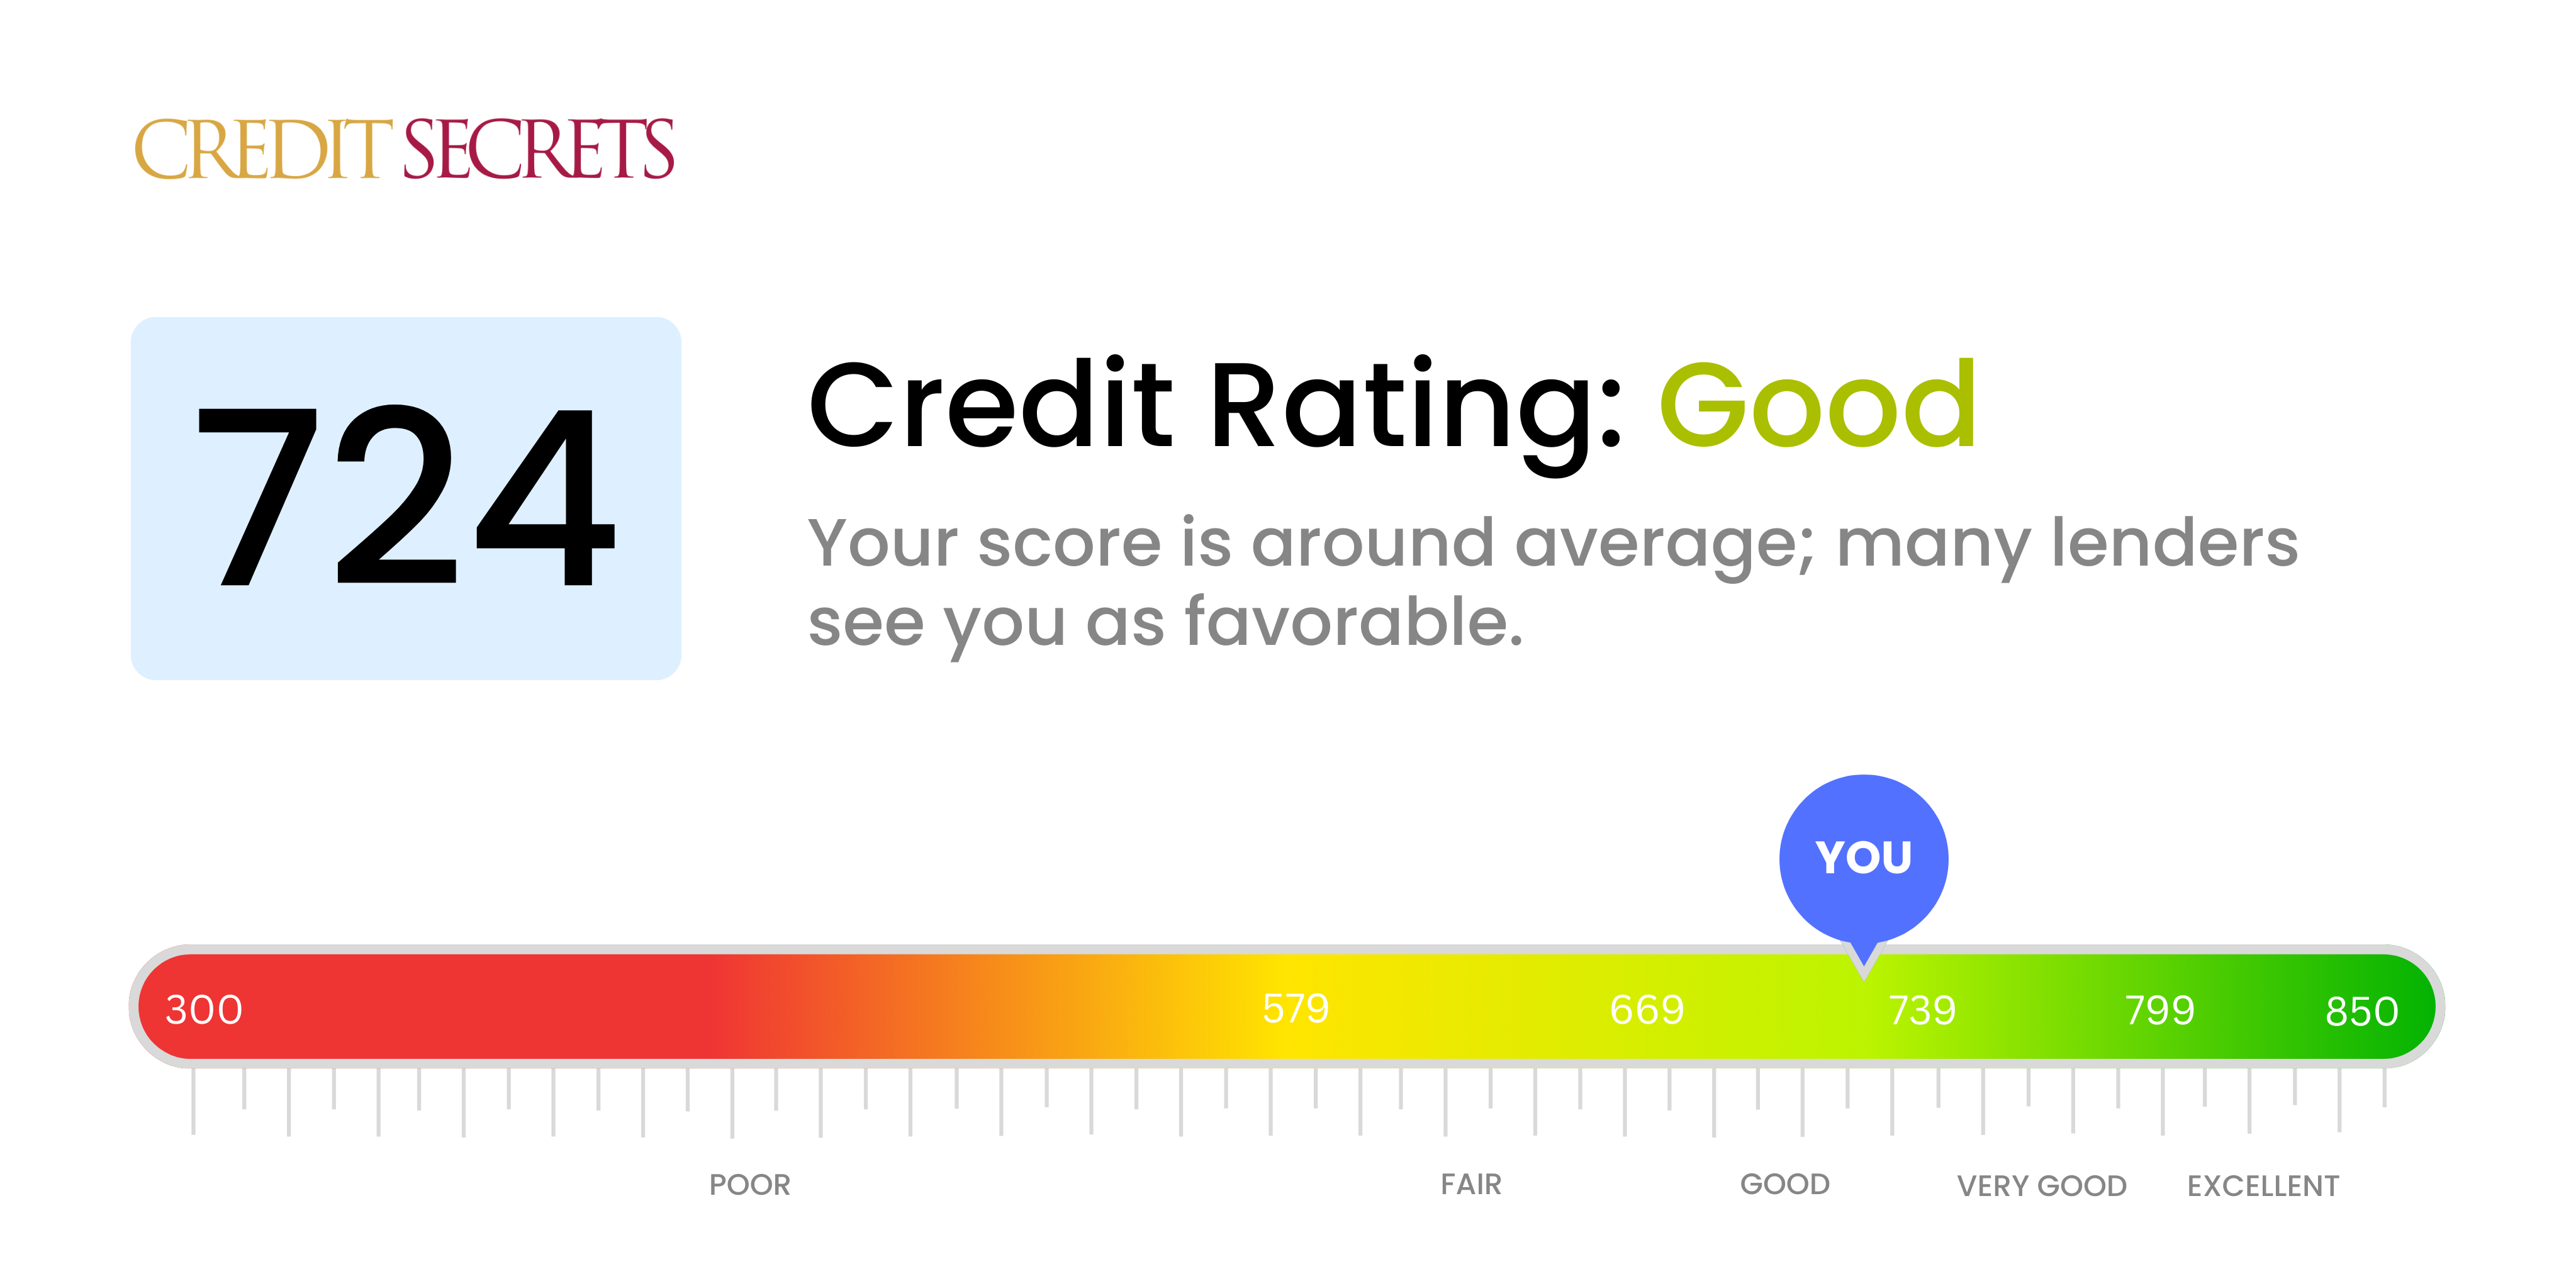 Is 724 a good credit score?